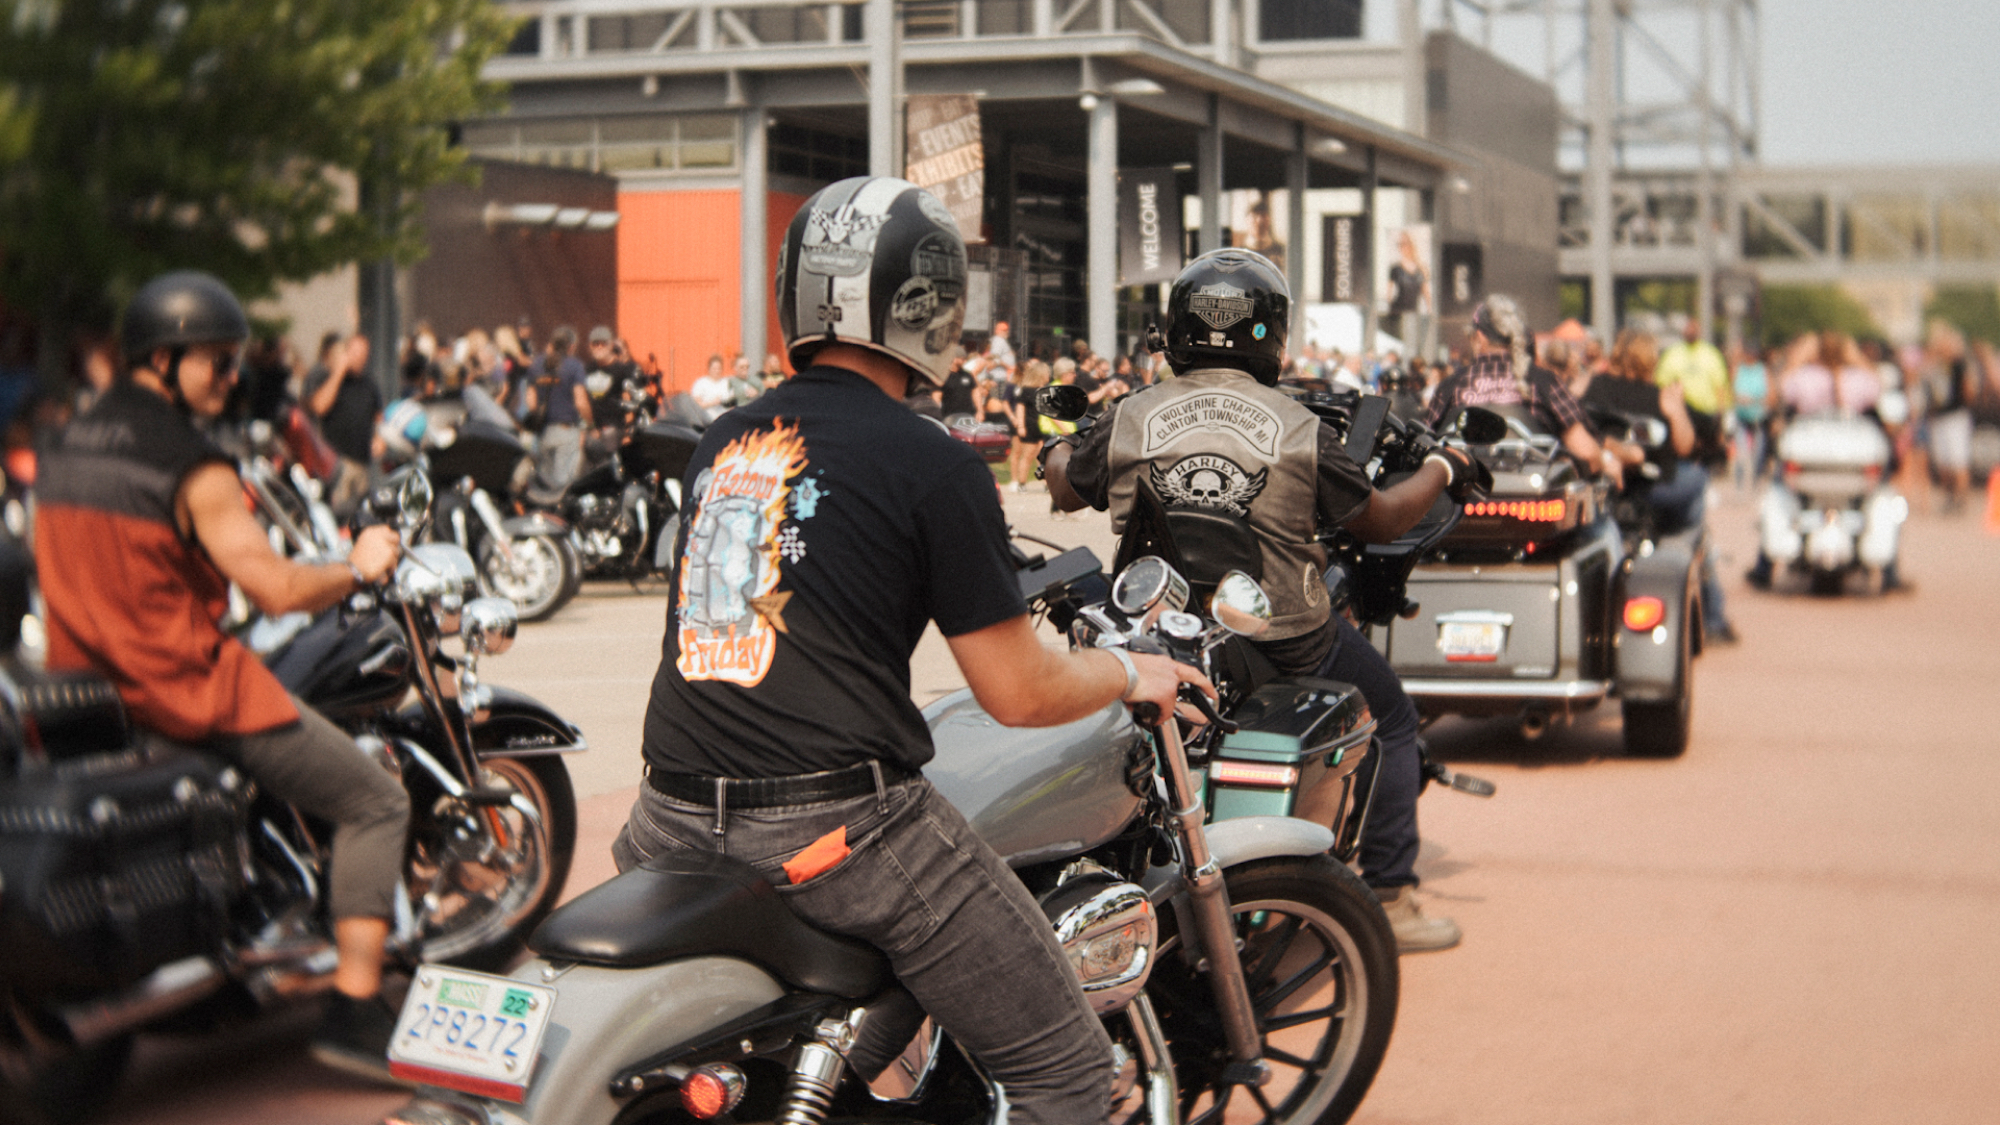 A view of the festivities that accompanied Harley-Davidson's Homecoming Festival. Media sourced from Harley-Davidson's recent press release.